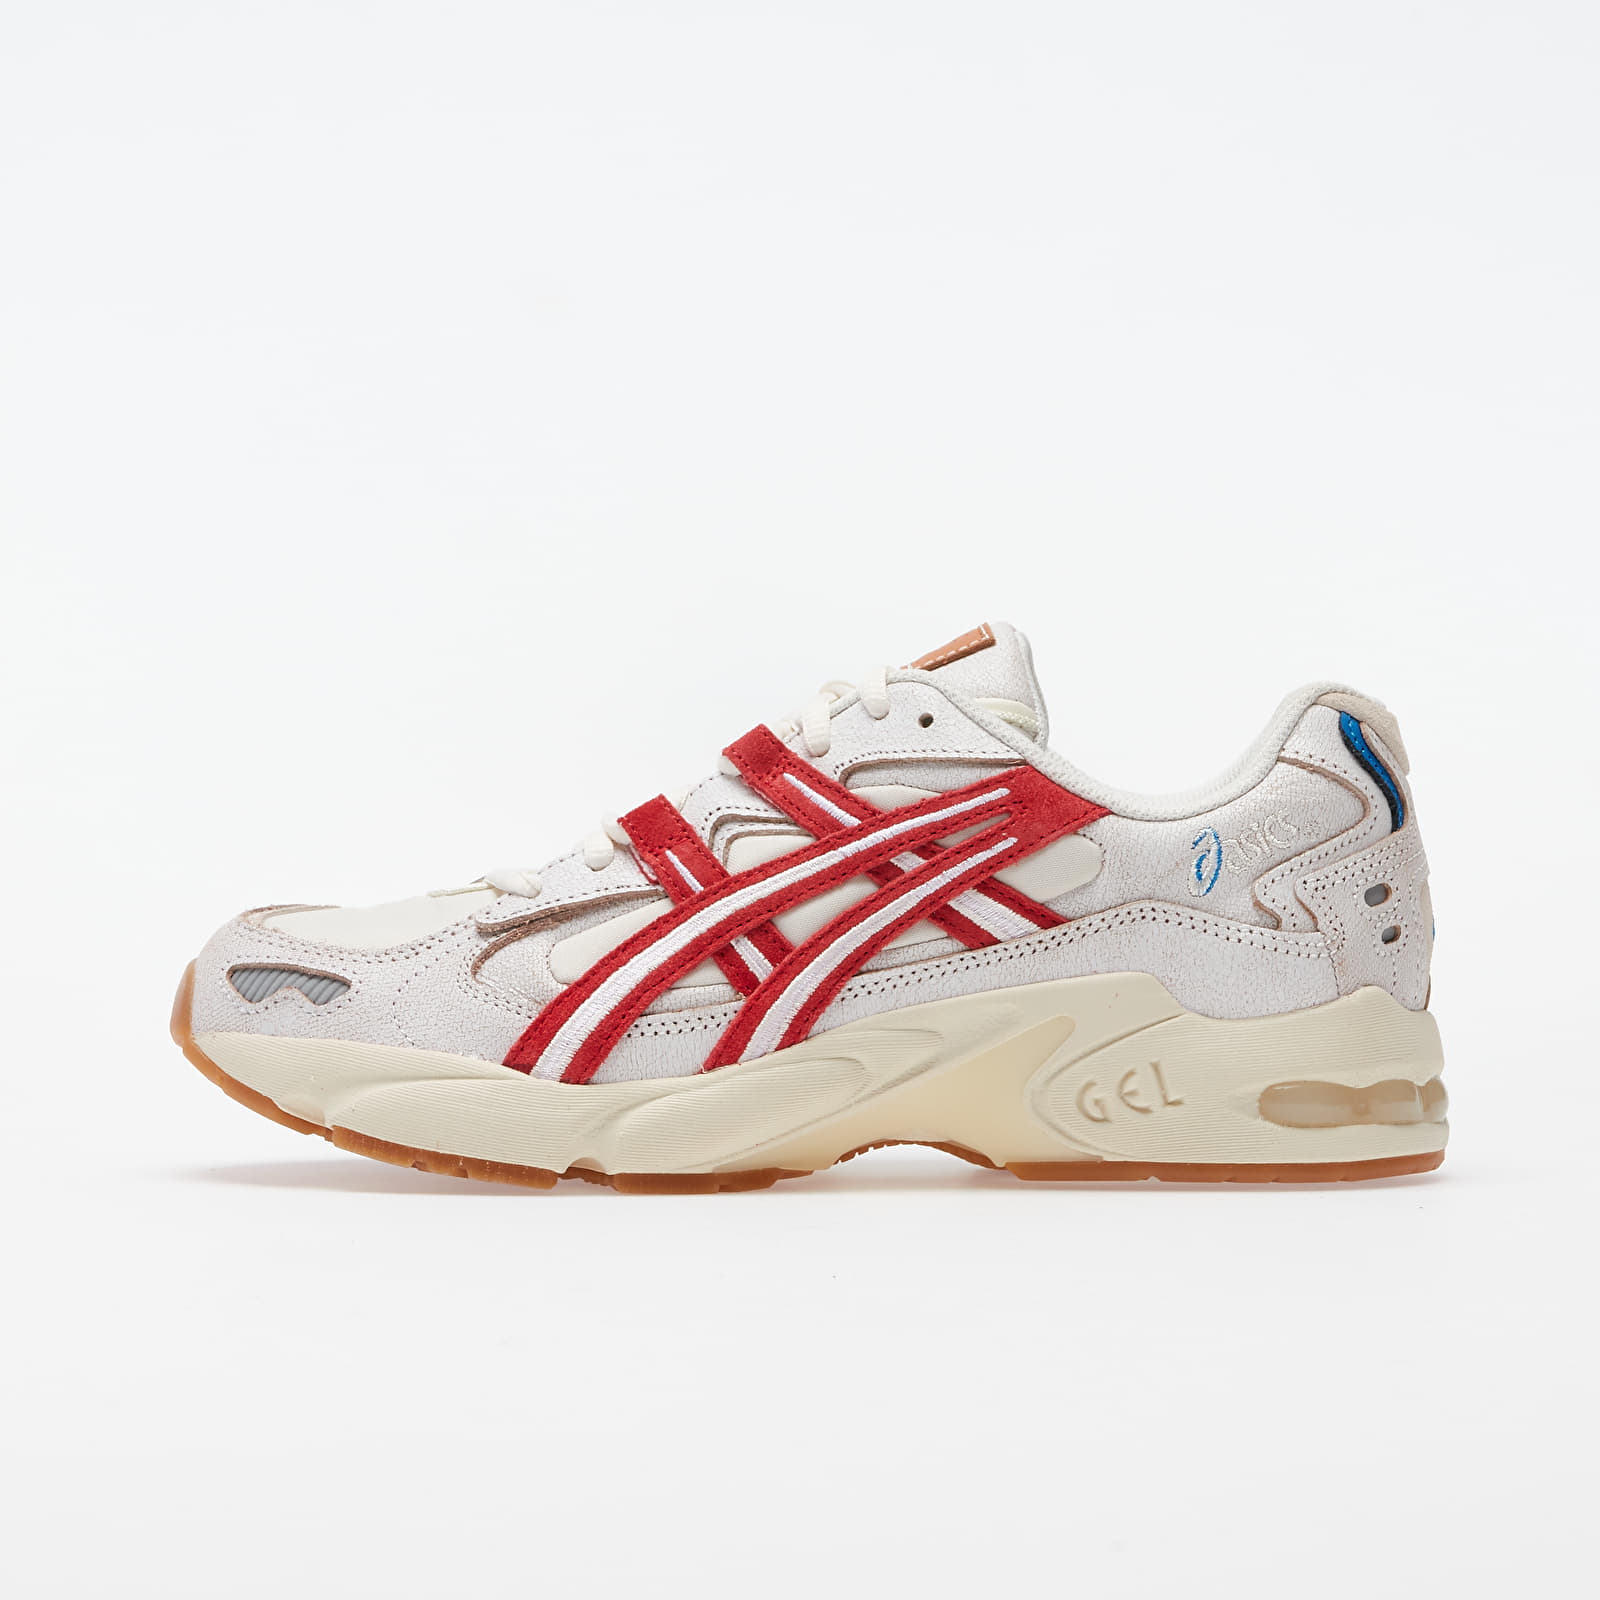 Chaussures et baskets homme Asics Gel Kayano 5 OG Cream/ Classic Red